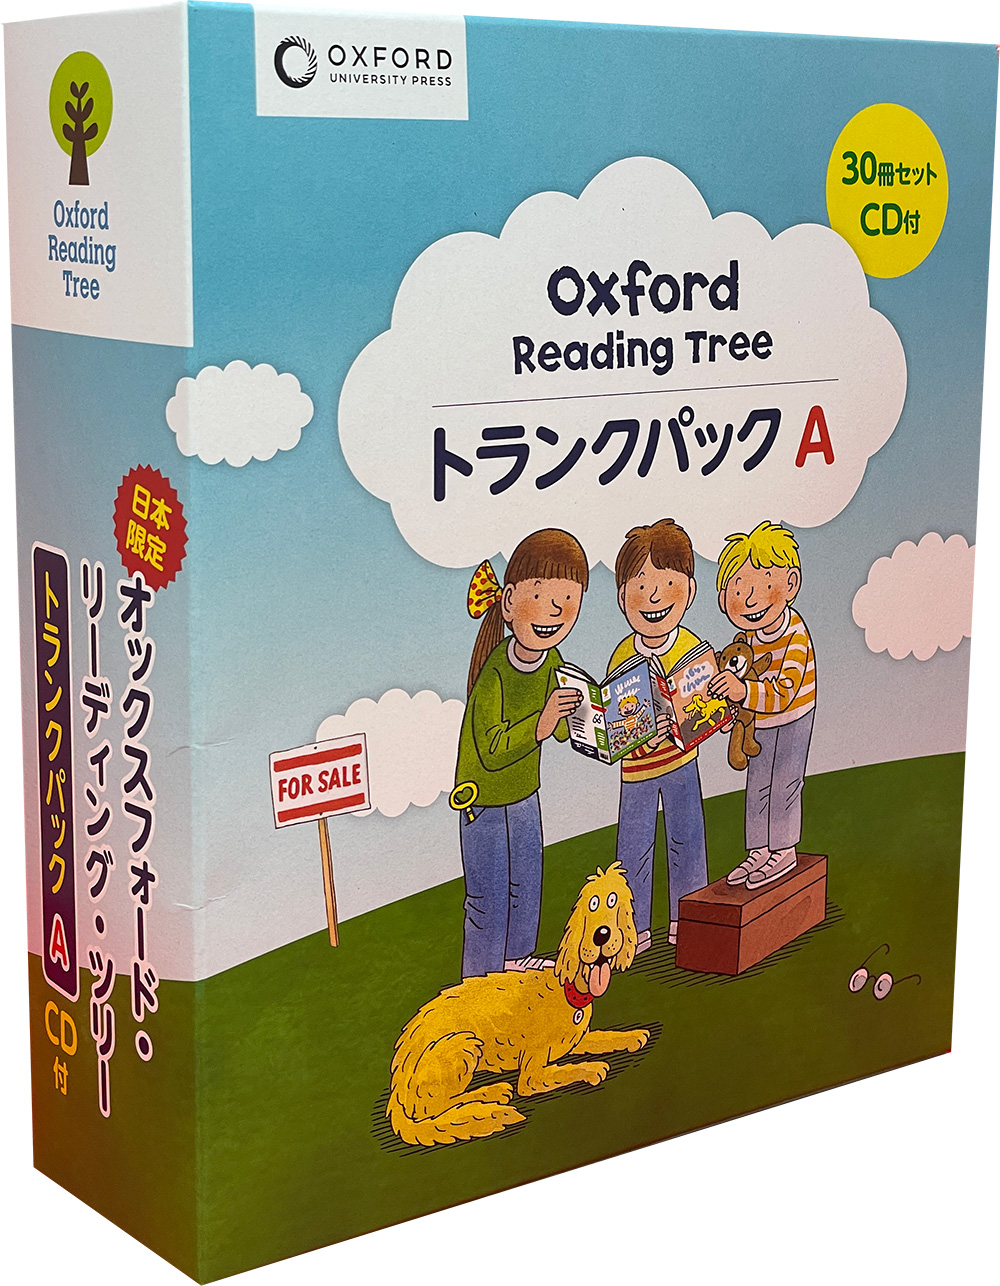 Oxford Reading Tree: Trunk Pack A CD付 20